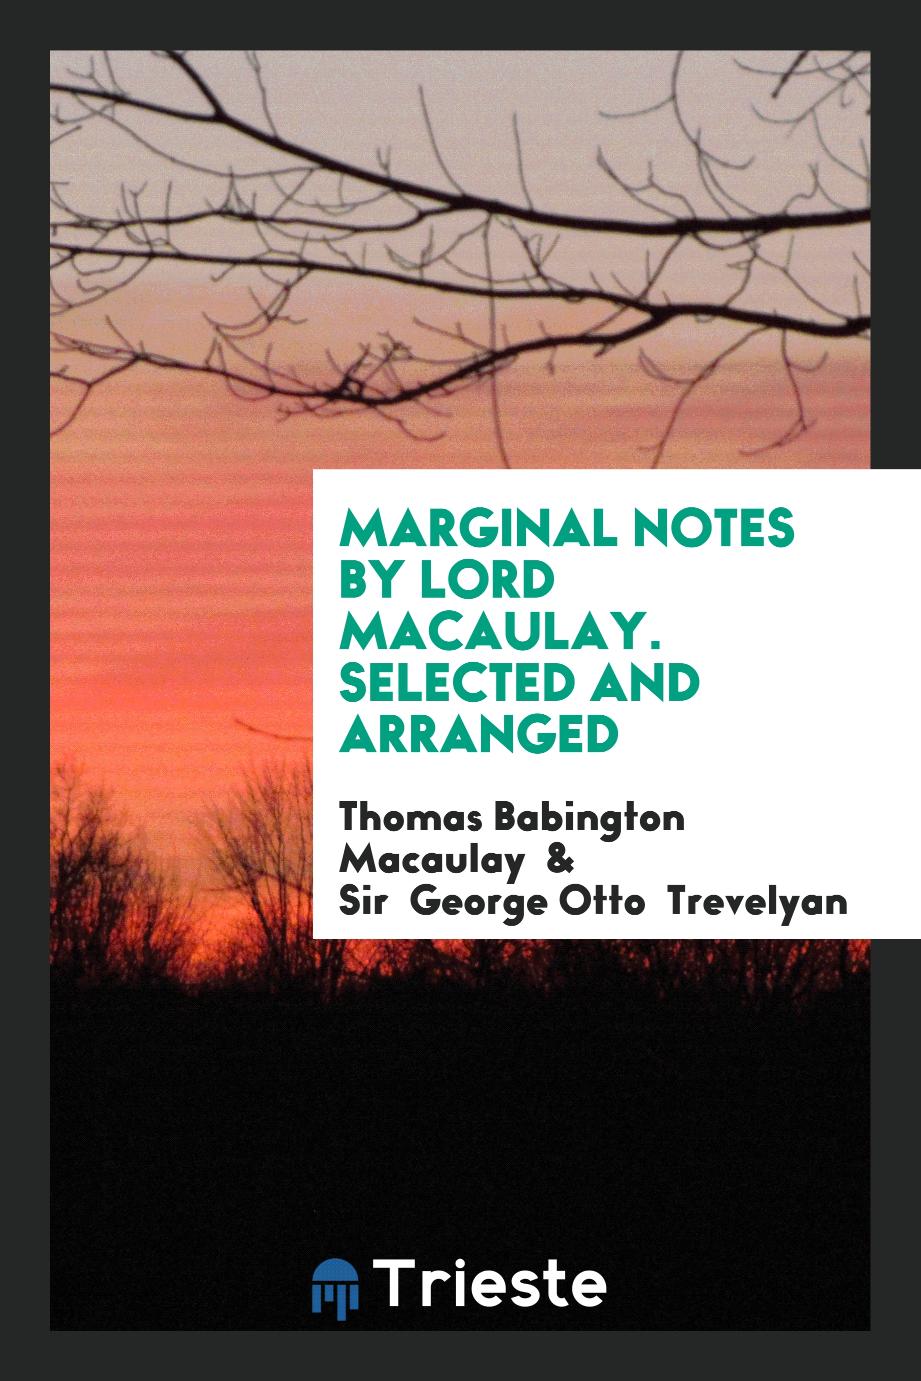 Marginal Notes by Lord Macaulay. Selected and arranged